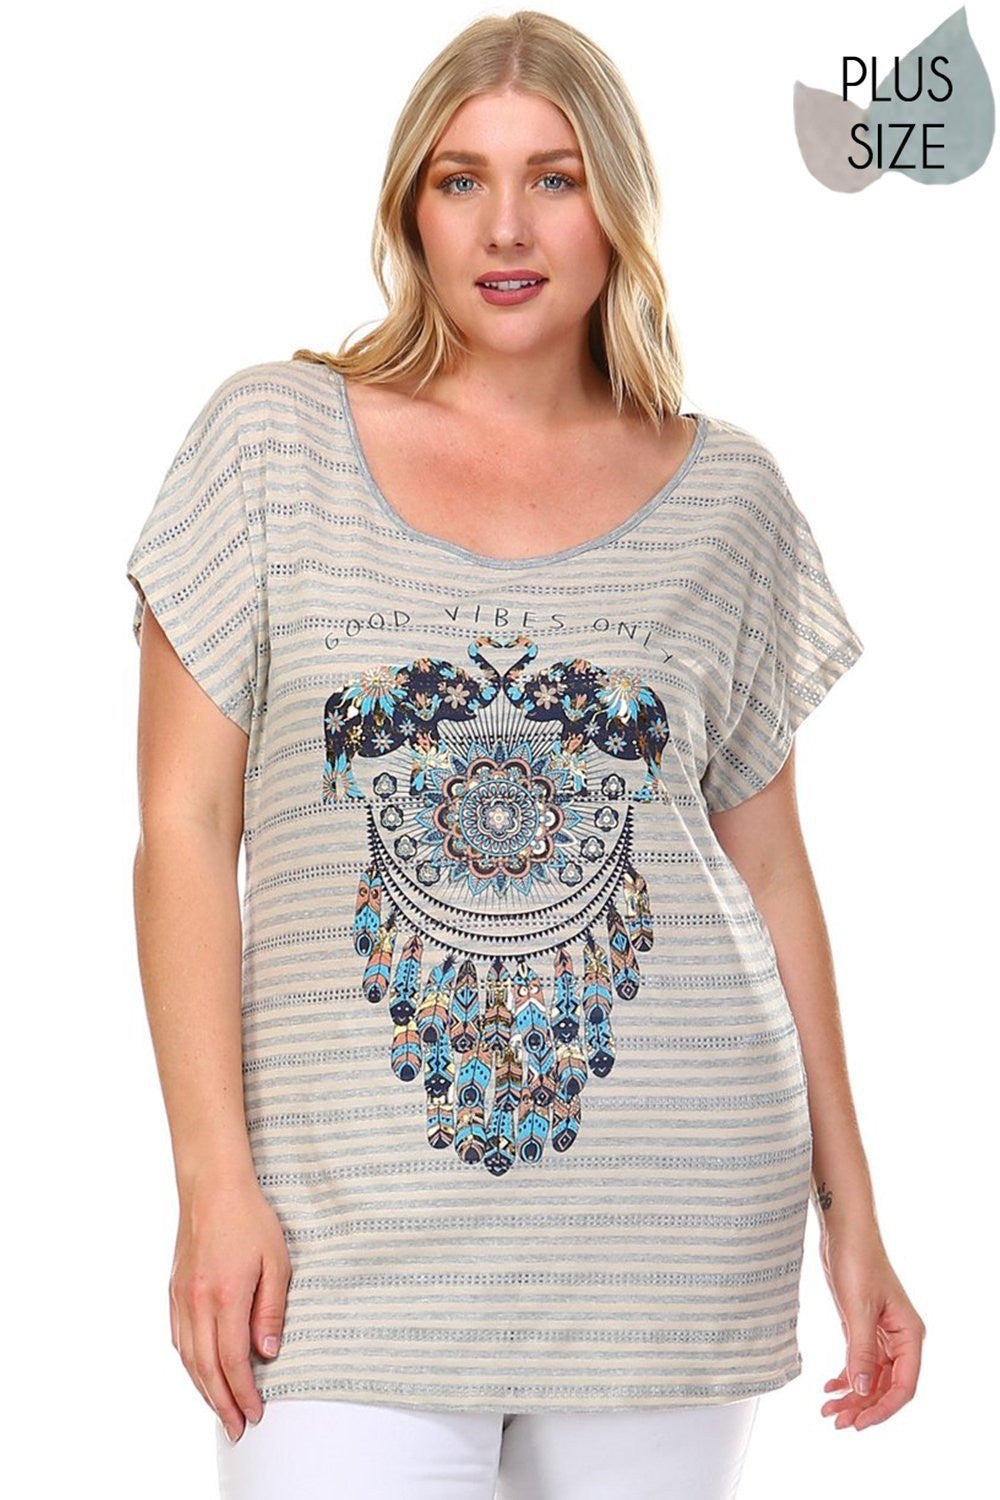 Beautiful woman wearing a "Good Vibes Only" V neck Striped top Featuring a geometric elephants and feathers Perfect skirt for an effortless boho style, pair with boots for fall or your favorite sandals for summer. Festivals, Beach Day, Vacation